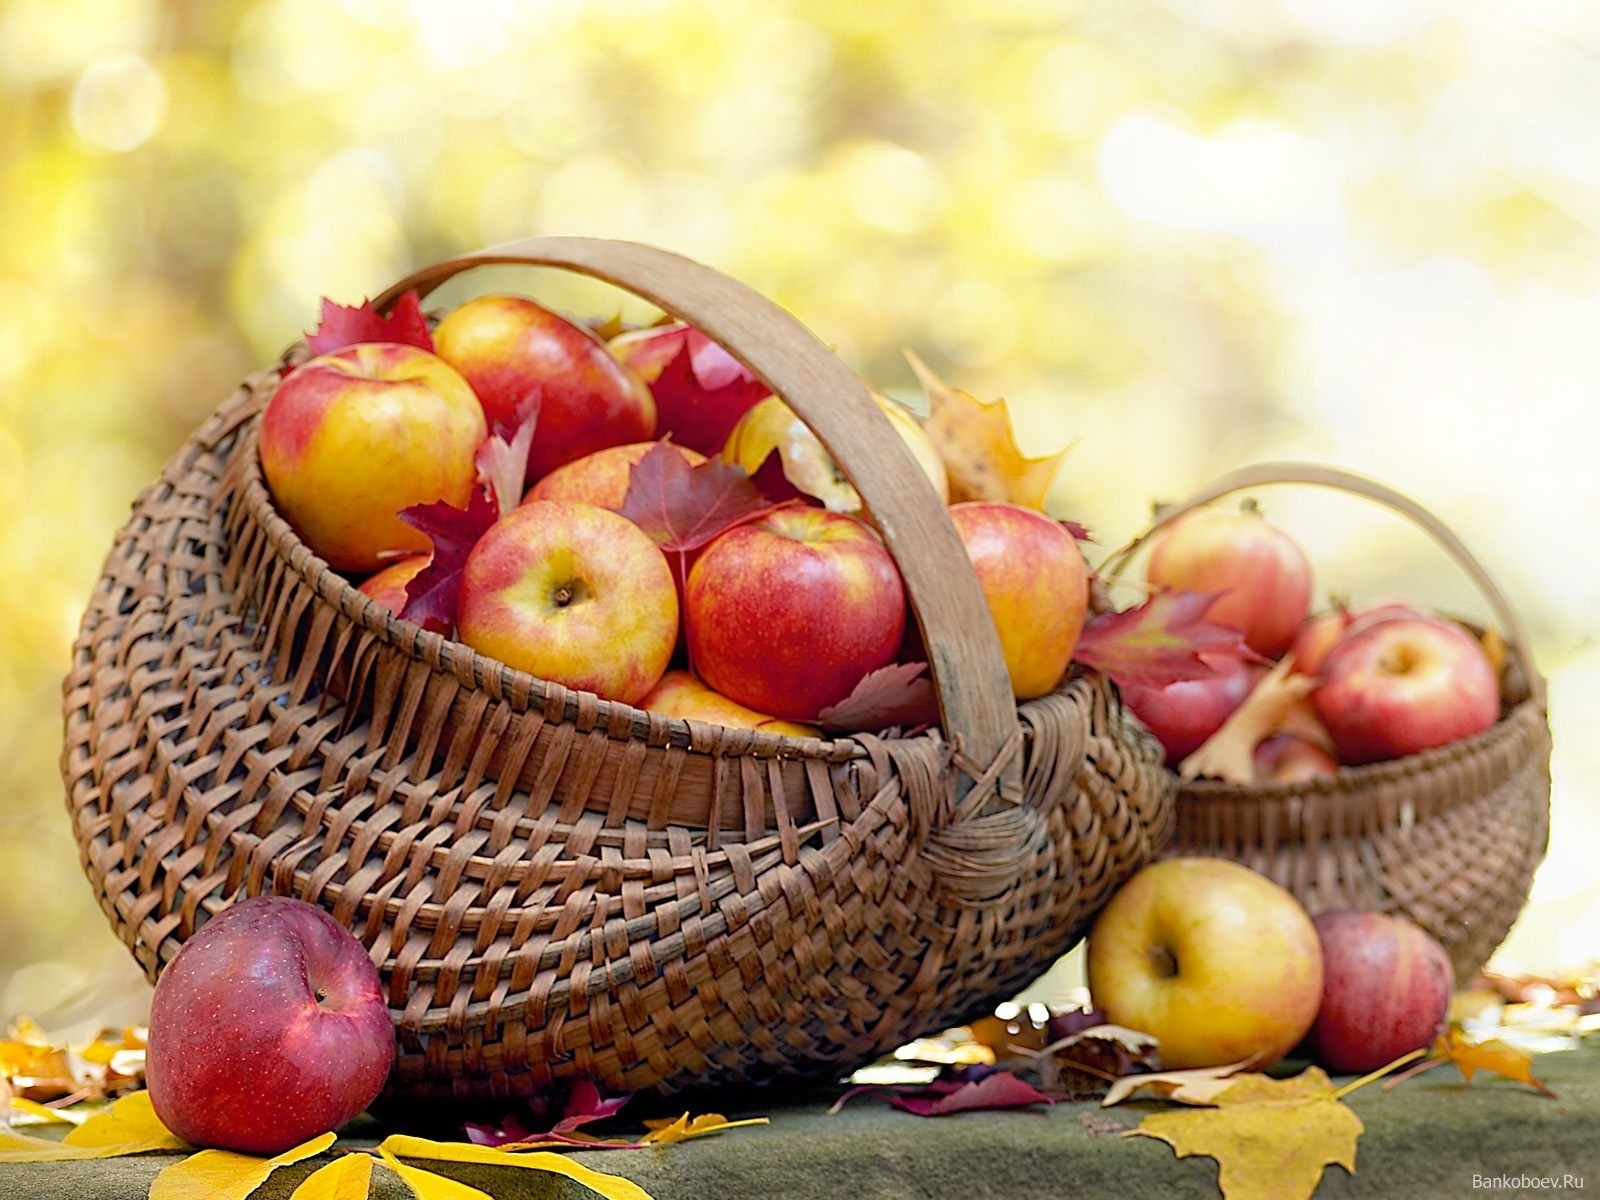 apples, fruits, food wallpapers for tablet